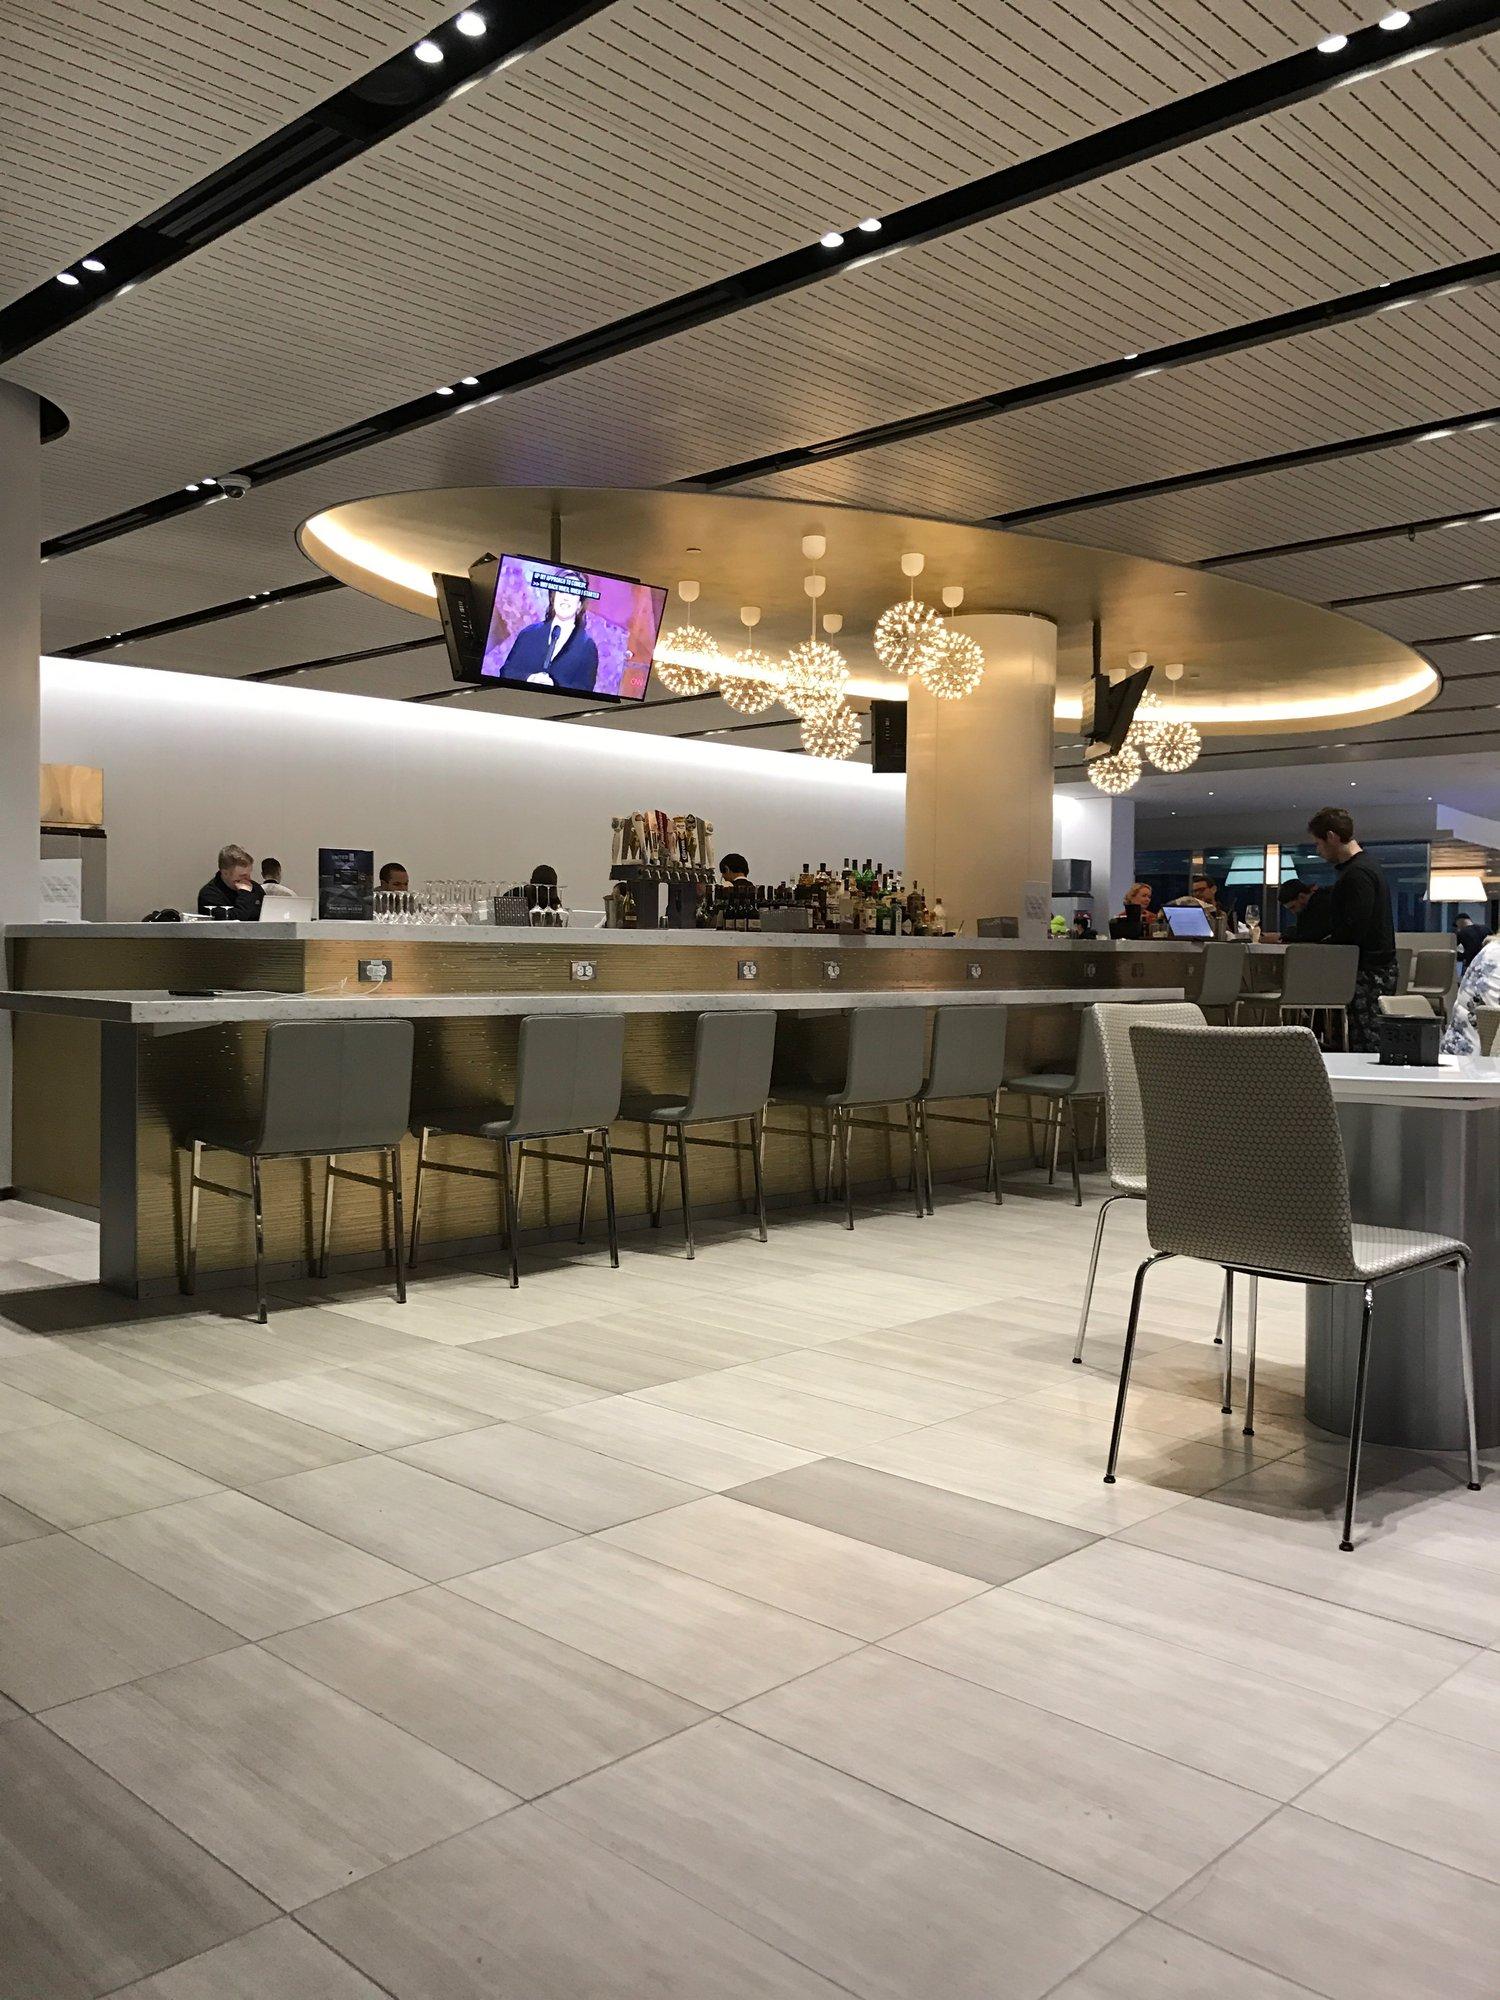 United Airlines United Club (Gate 71A) image 52 of 100